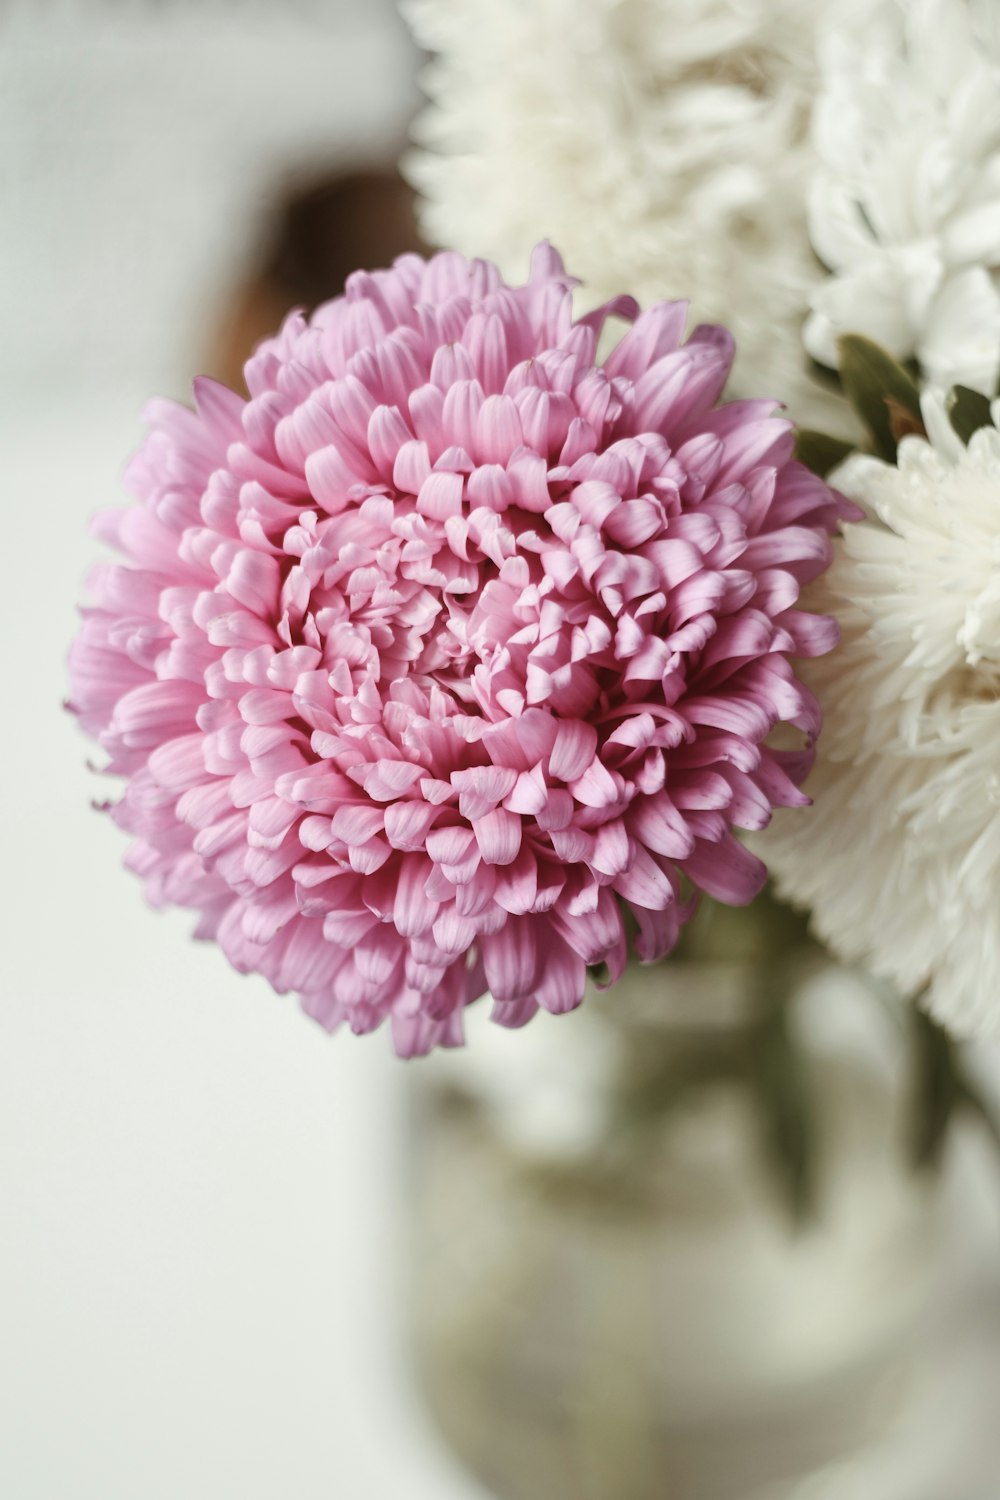 blooming pink and white flowers in vase